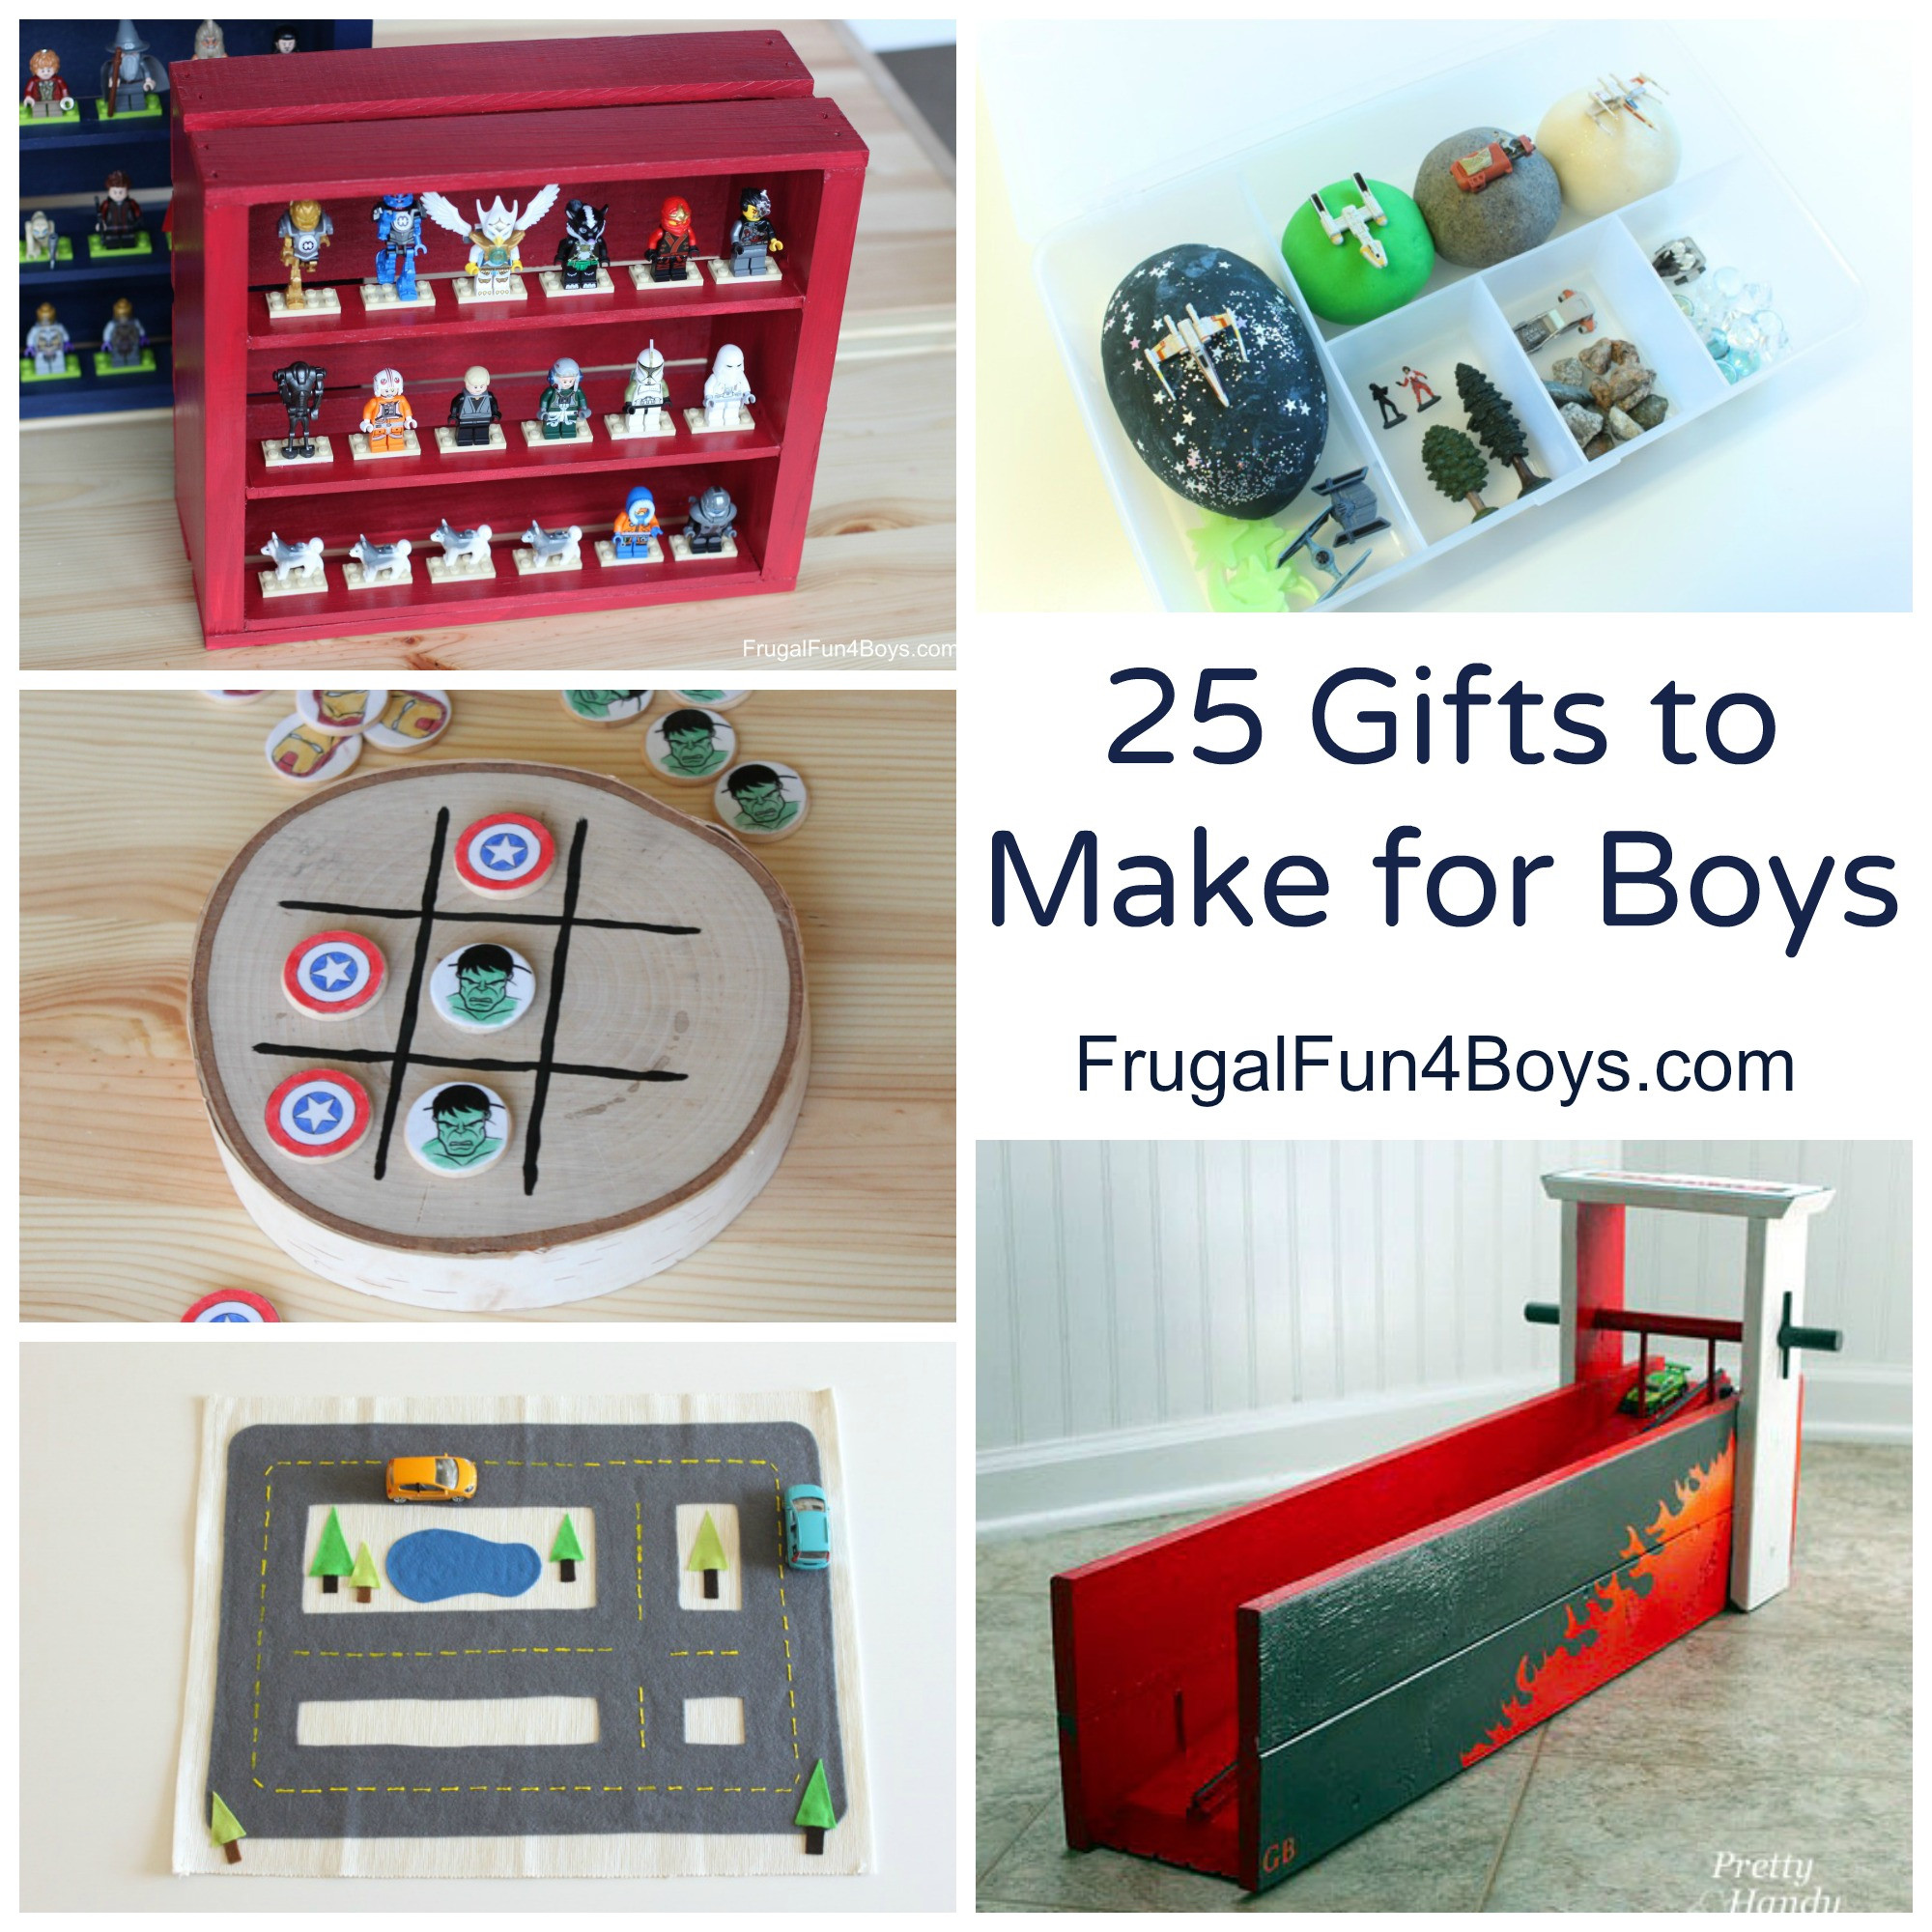 Diy Gift Ideas For Boys
 25 More Homemade Gifts to Make for Boys